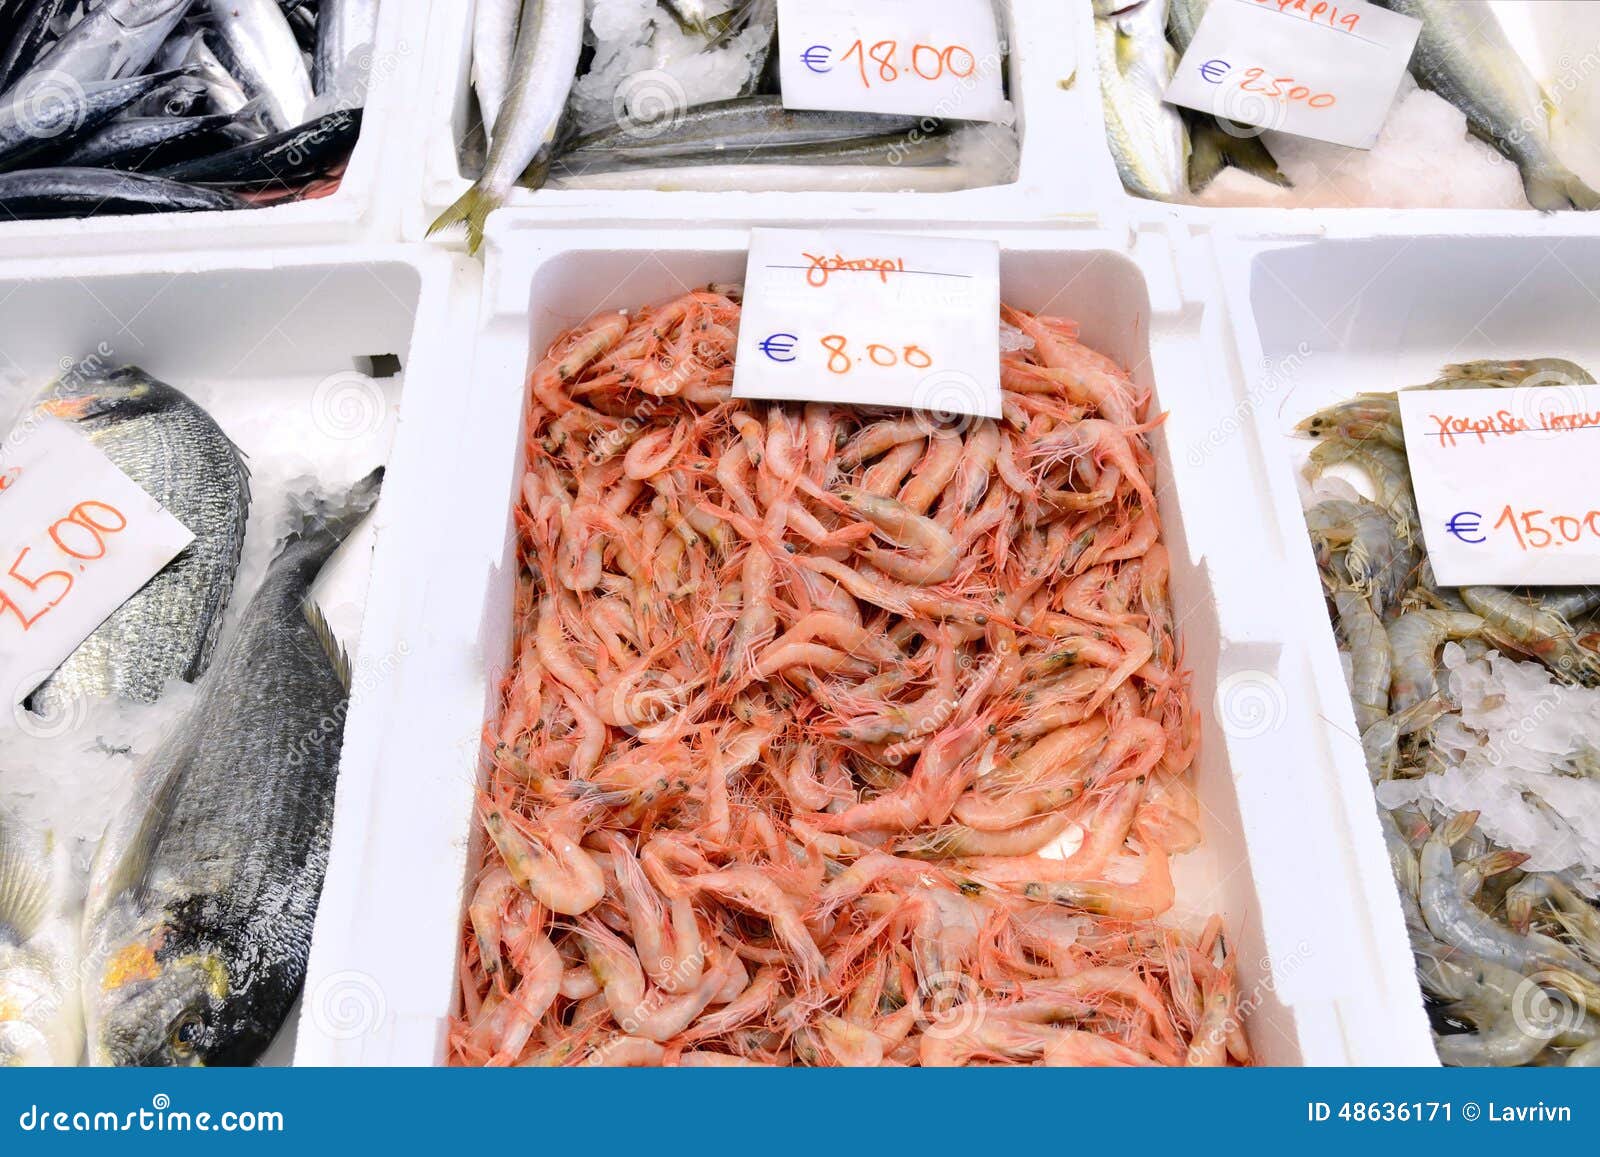 How to Start a Seafood Business